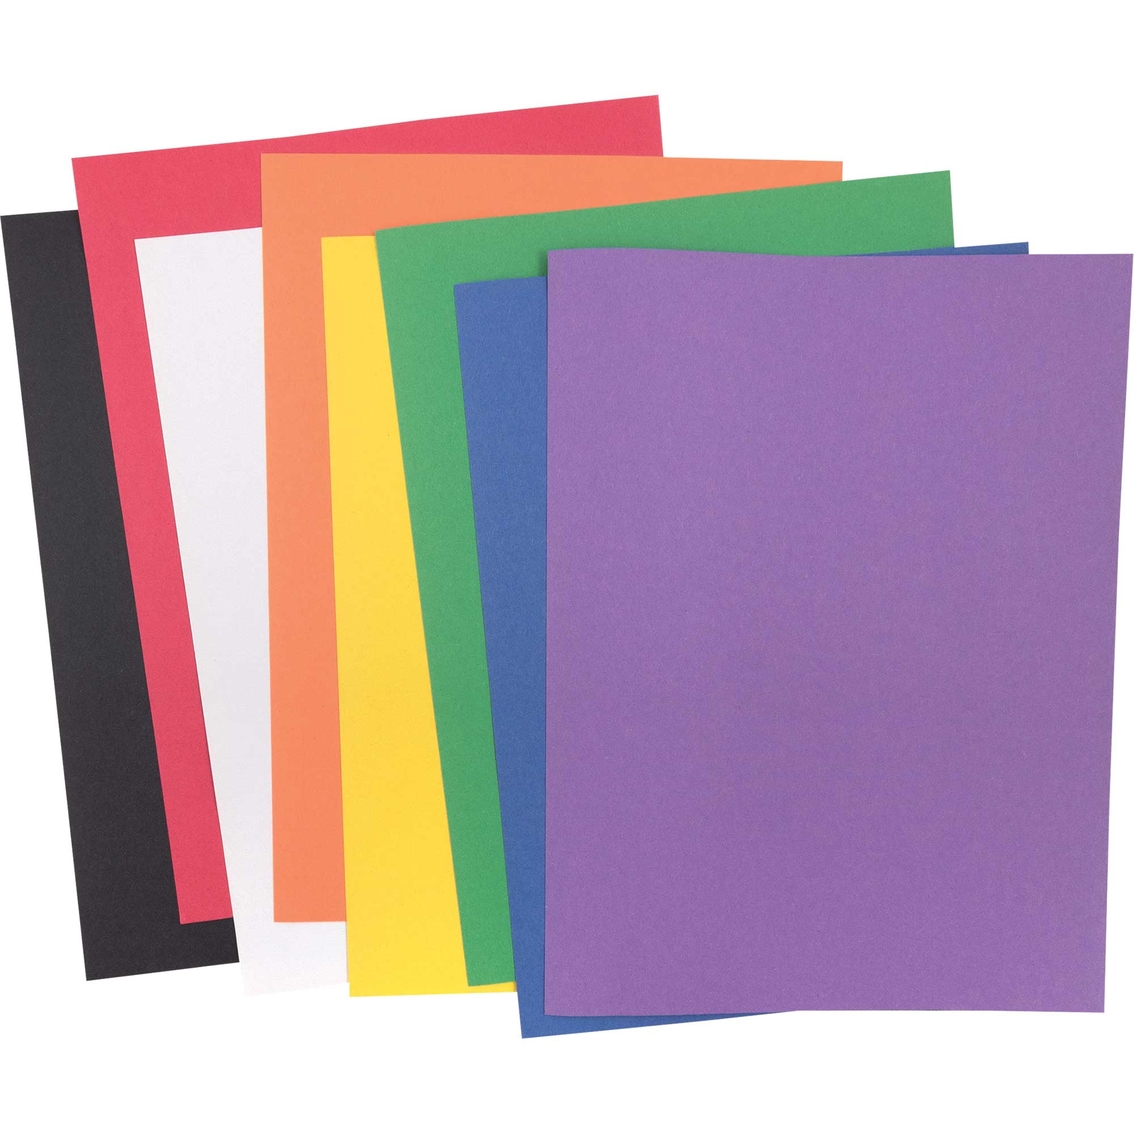 Pacon 9 x 12 in. Heavyweight Construction Paper 48 ct. - Image 2 of 2